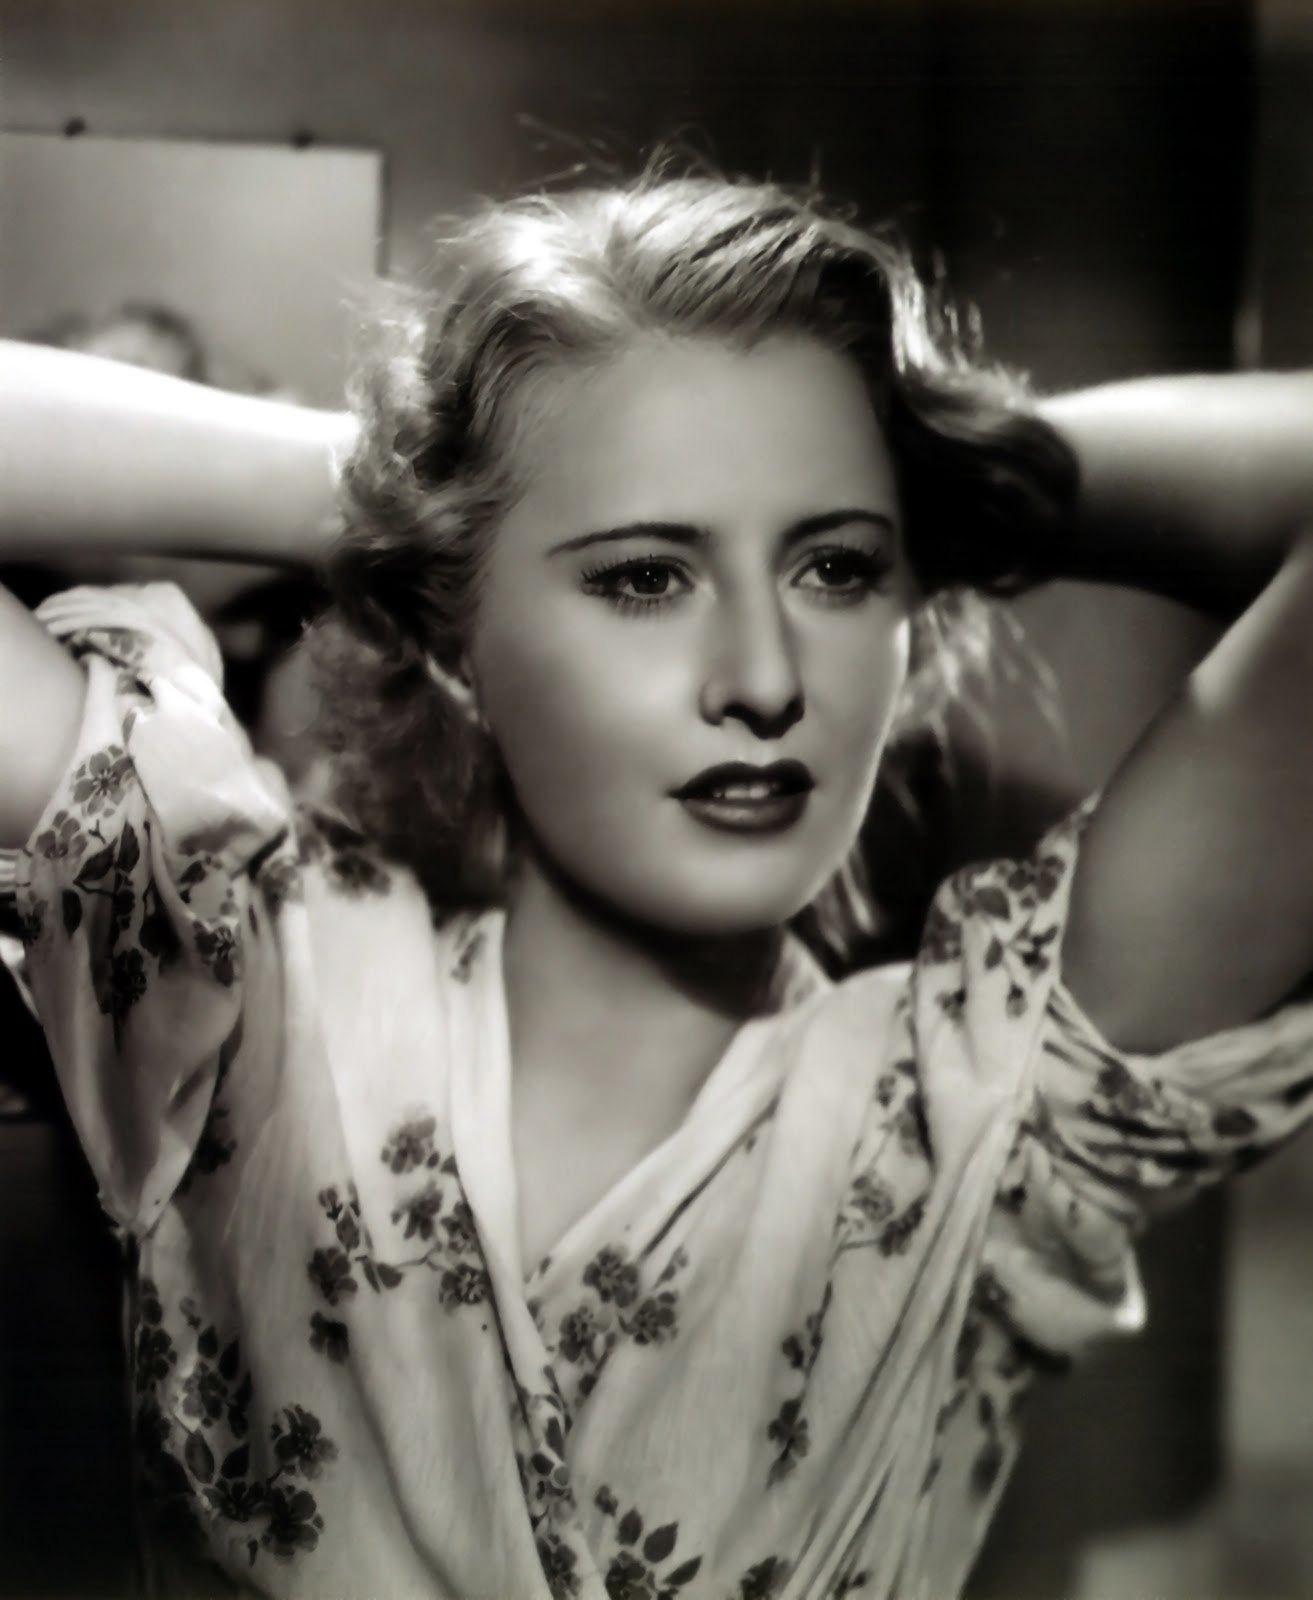 Love Those Classic Movies!!!: Barbara Stanwyck: "I want to go on until